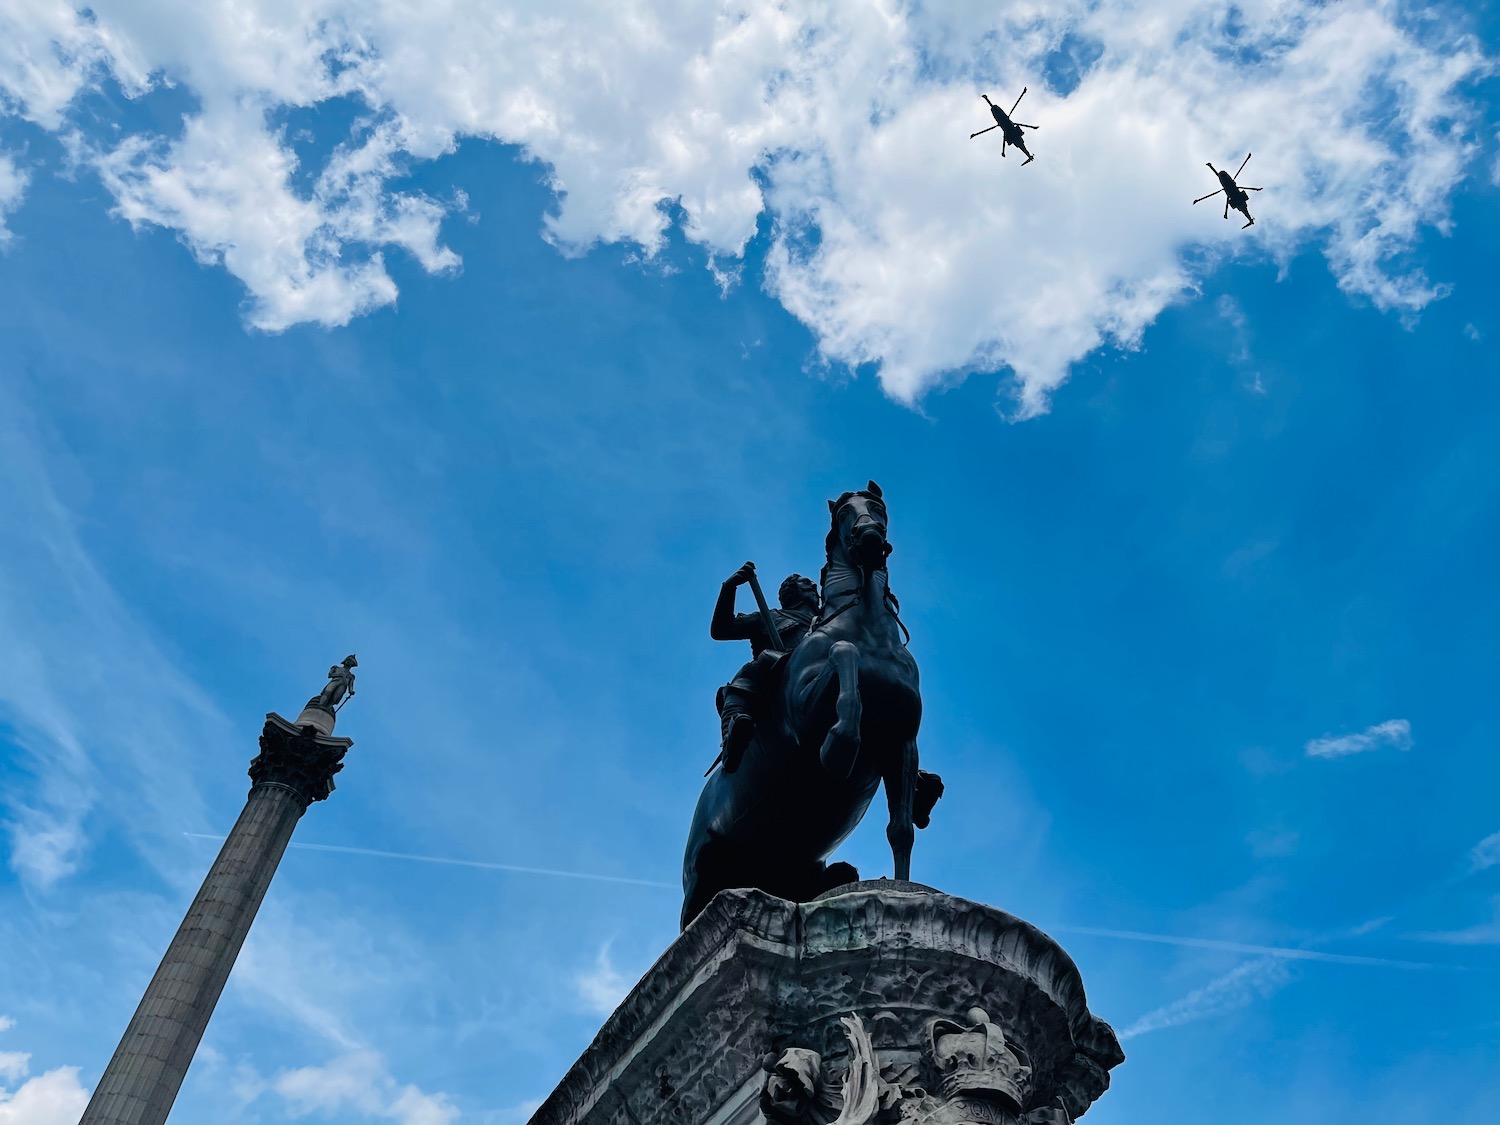 a statue of a man on a horse and two helicopters flying in the sky